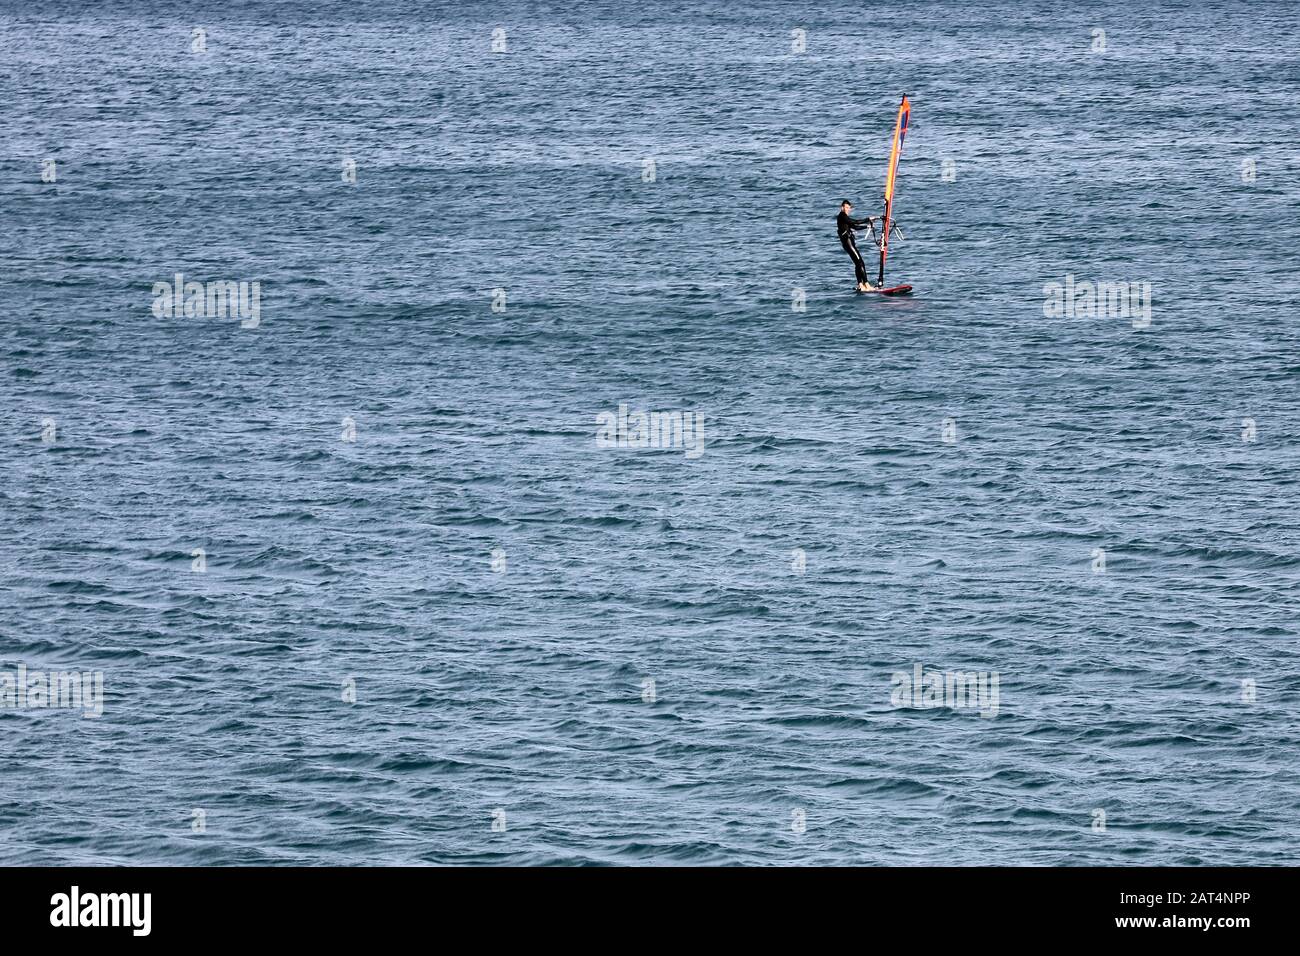 A person alone doing windsurf at the sea, in Valencia. Stock Photo